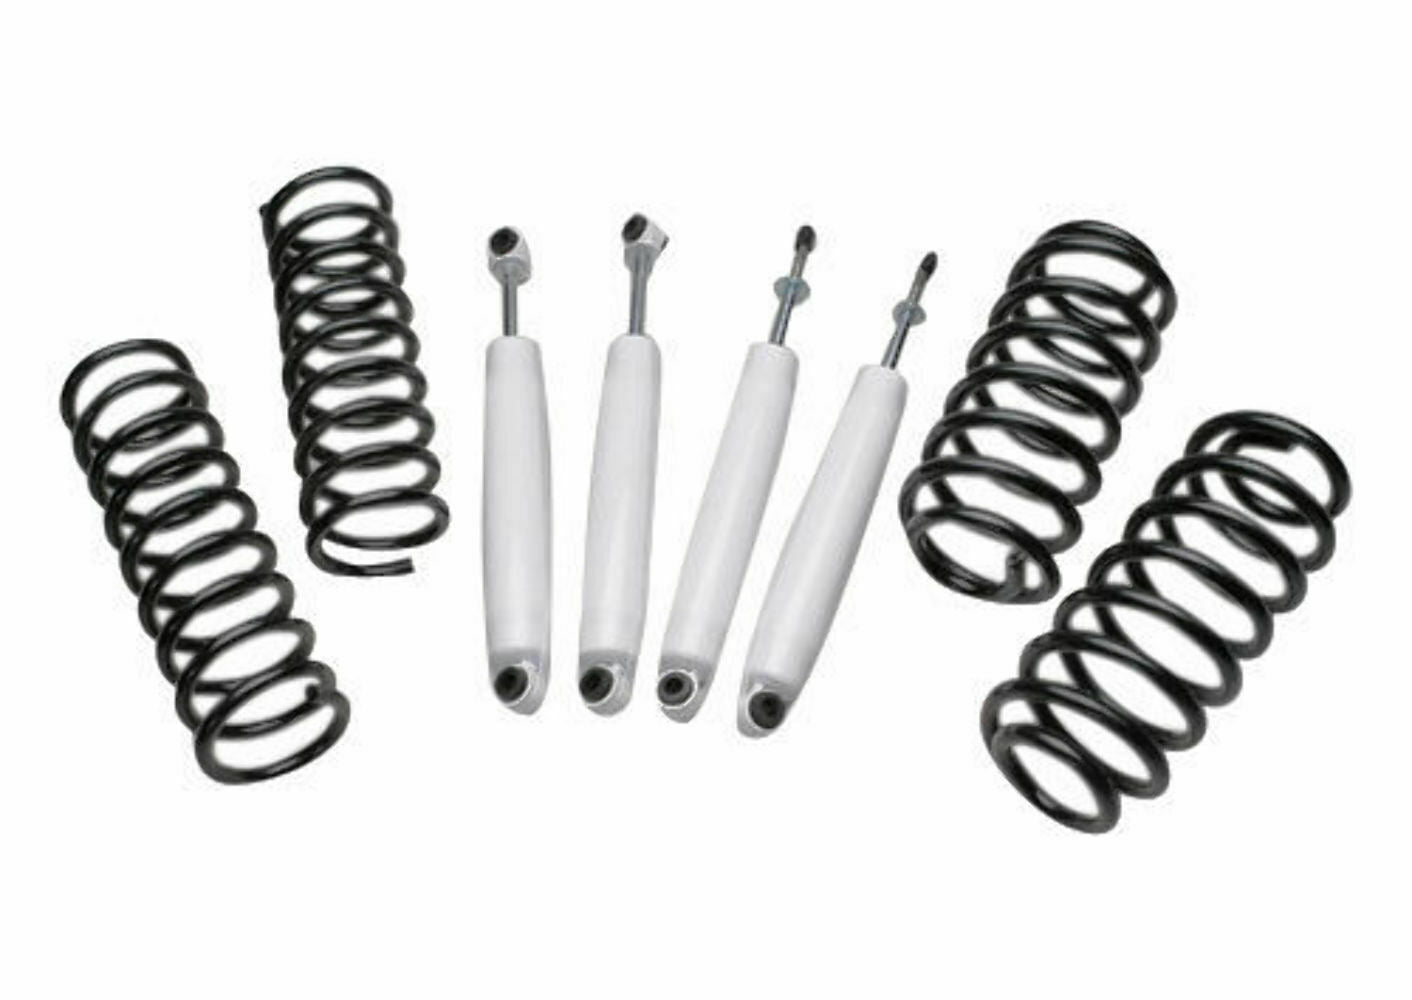 2.5" Suspension Lift Kit w/ Shocks and F & R Sway Bar Links for 1999-2004 Jeep Grand Cherokee